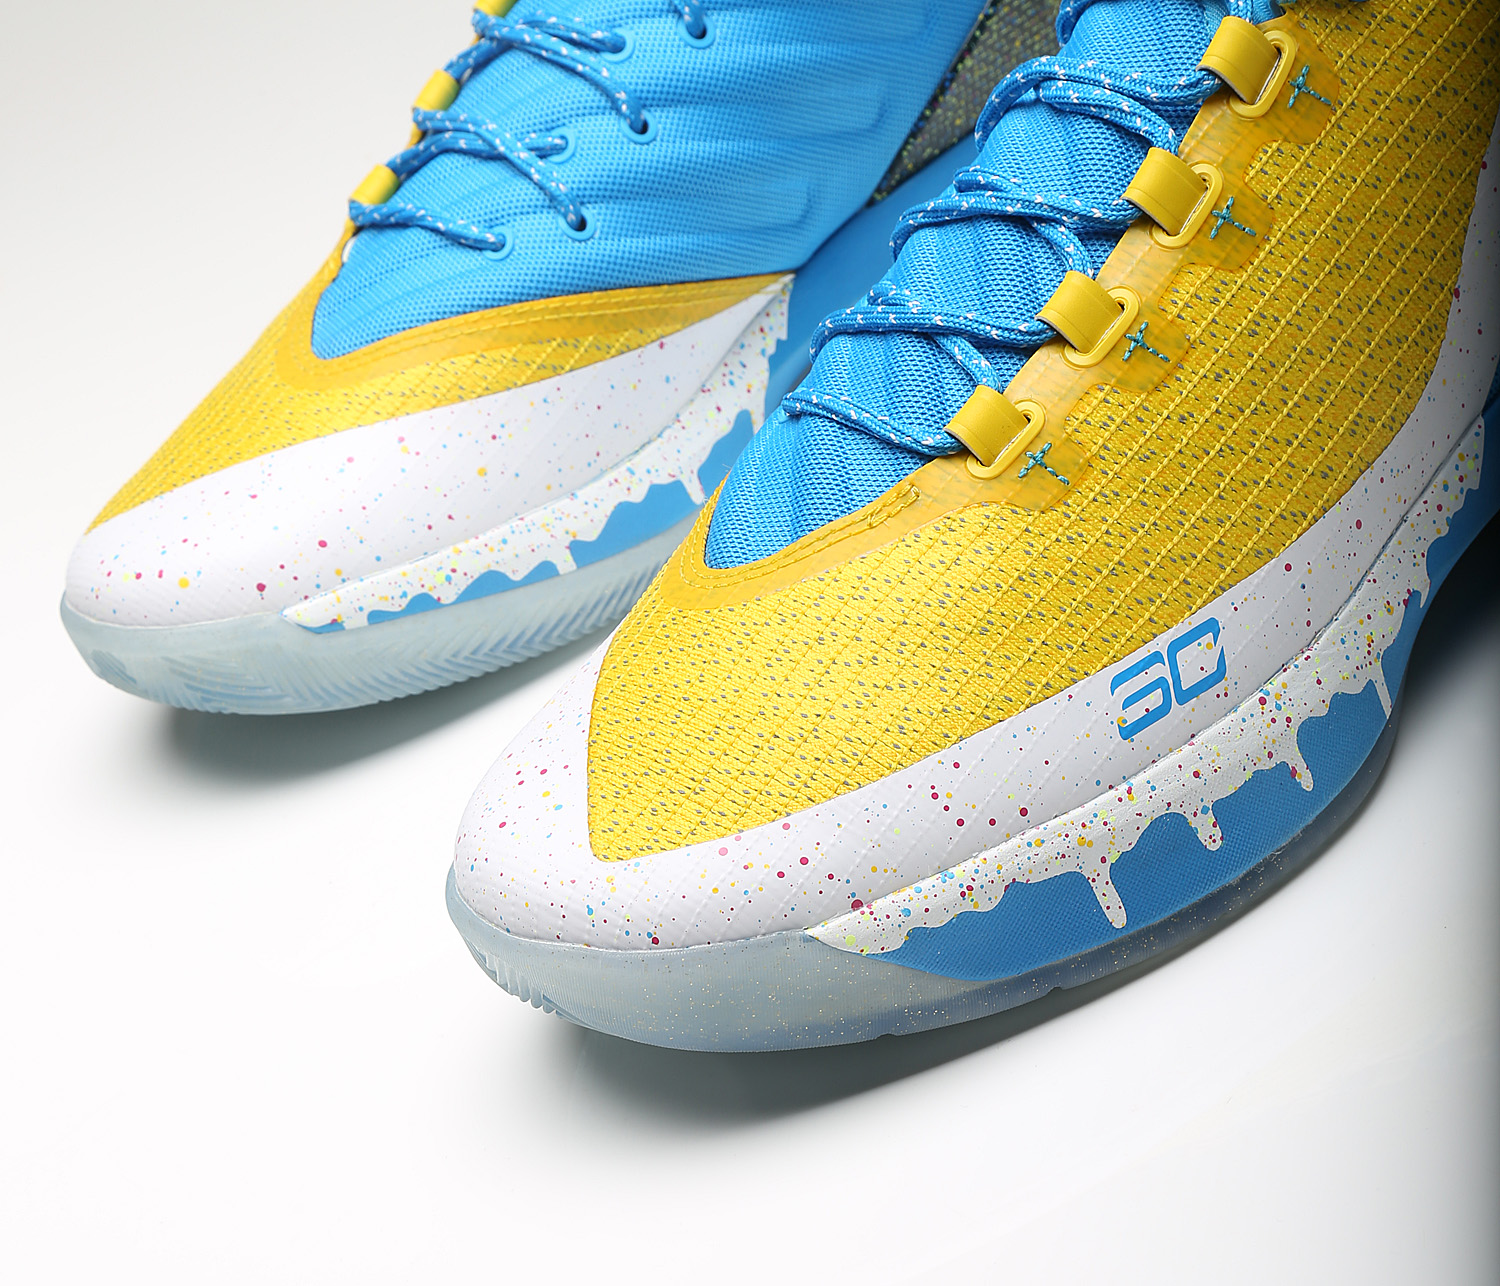 Under Armour Curry 2.5 Full Release Details